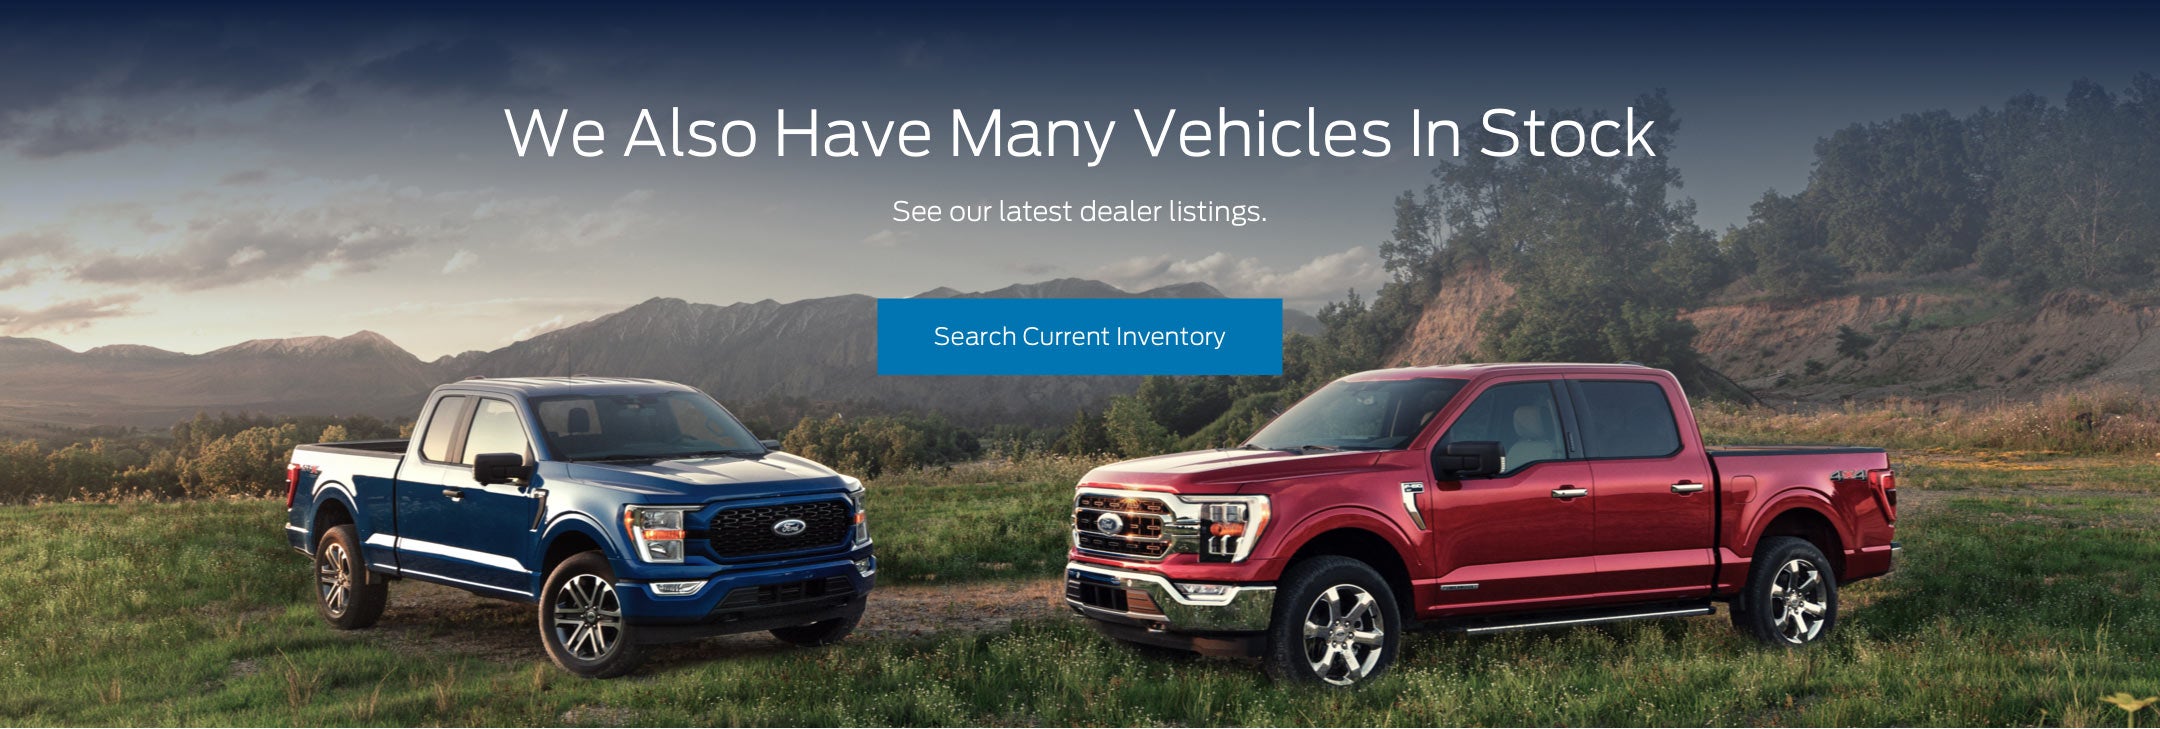 Ford vehicles in stock | Ourisman Tri-State Ford in Rising Sun MD